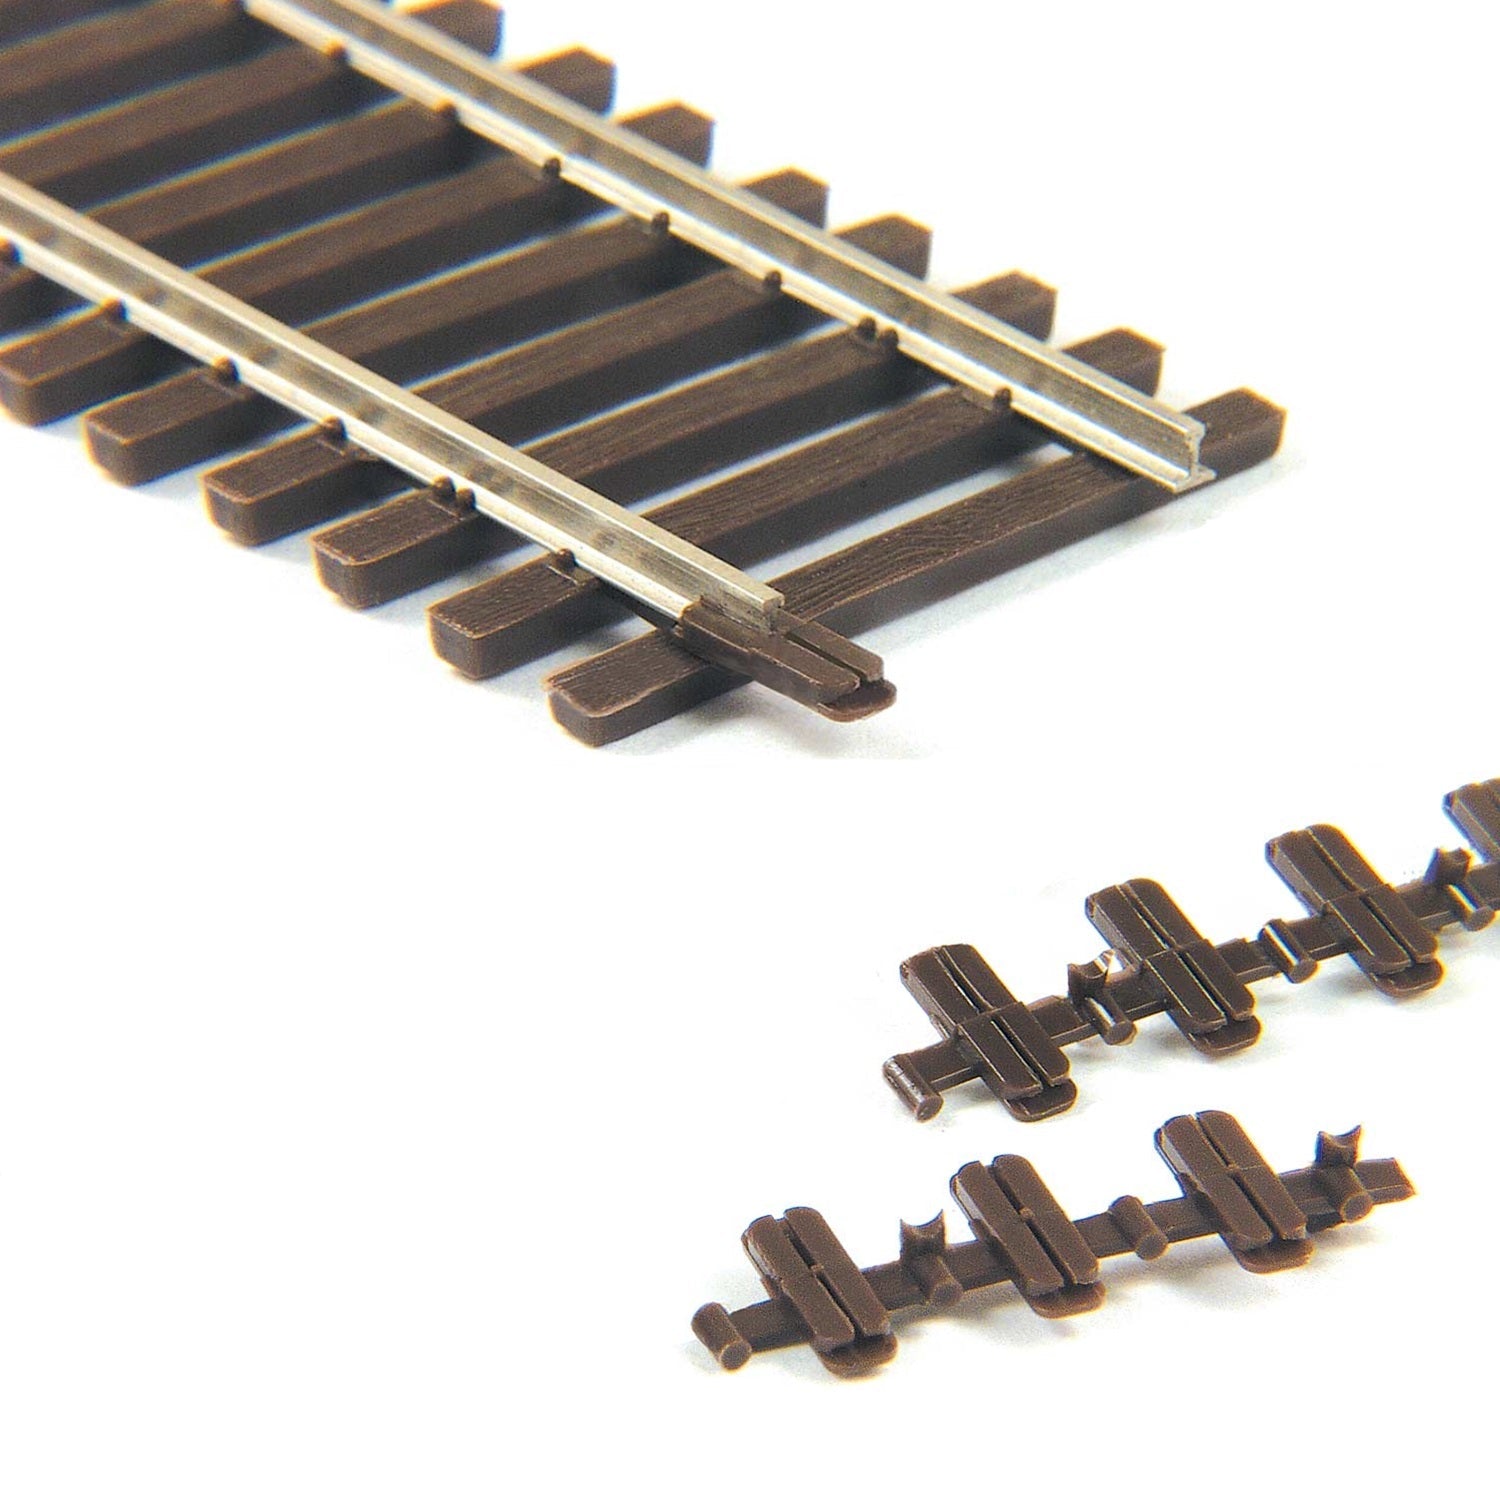 Micro Engineering Code 83 to 70 Transition Rail Joiners, 4 pair